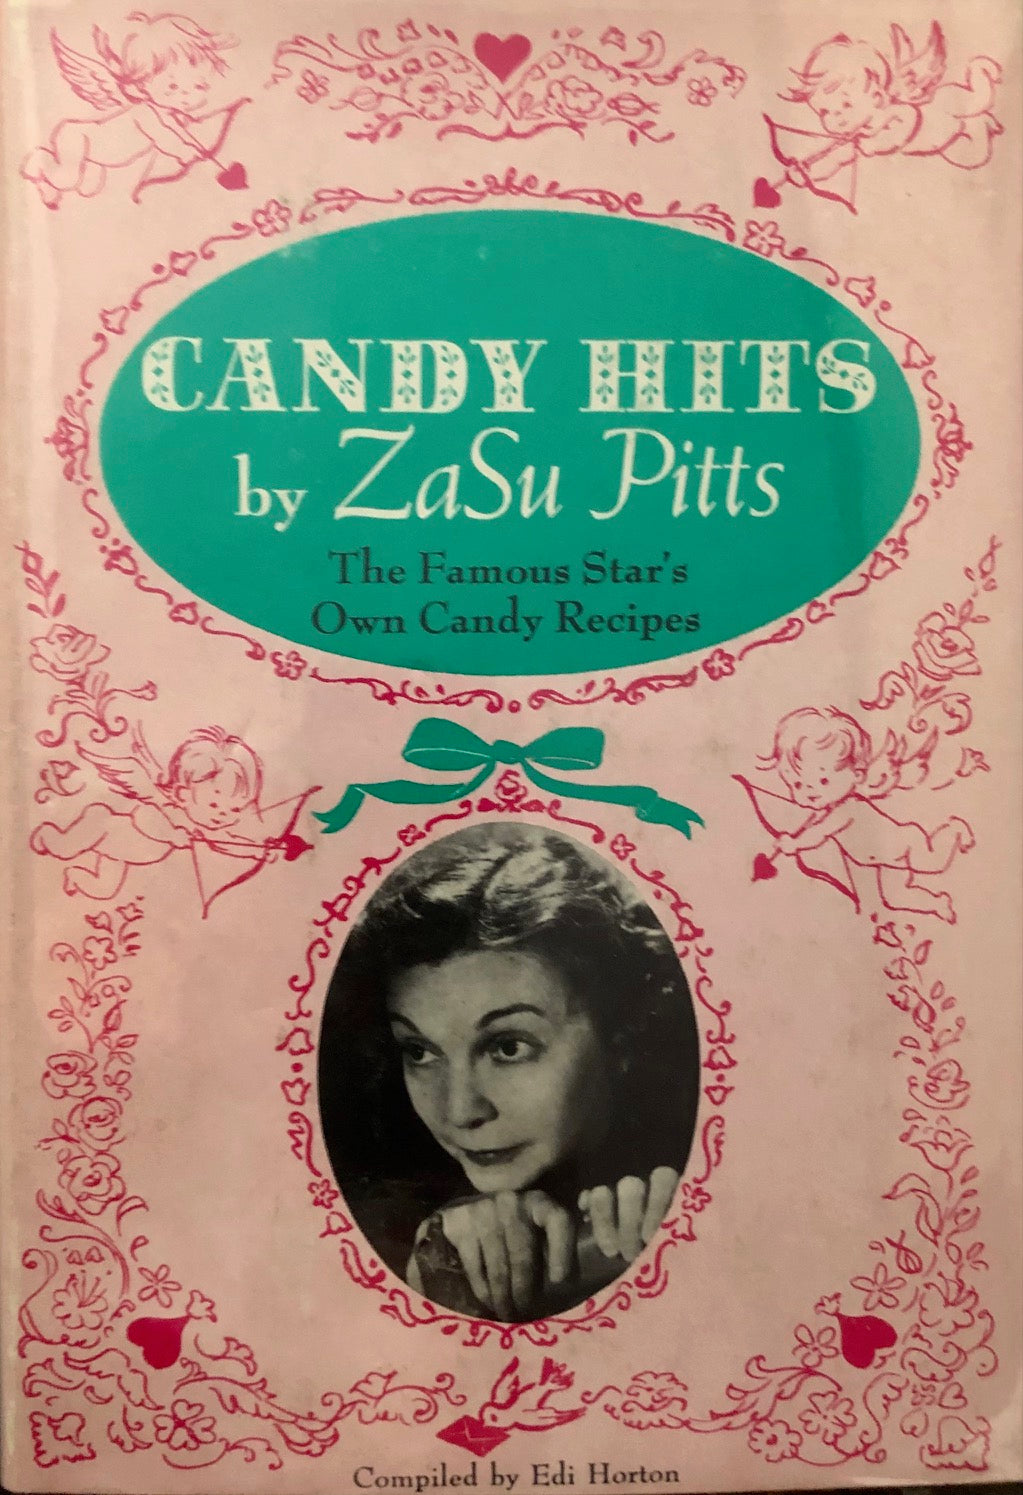 (*NEW ARRIVAL*) (Celebrity) Zasu Pitts. Candy Hits by Zasu Pitts: The Famouse Star's Own Candy Recipes.